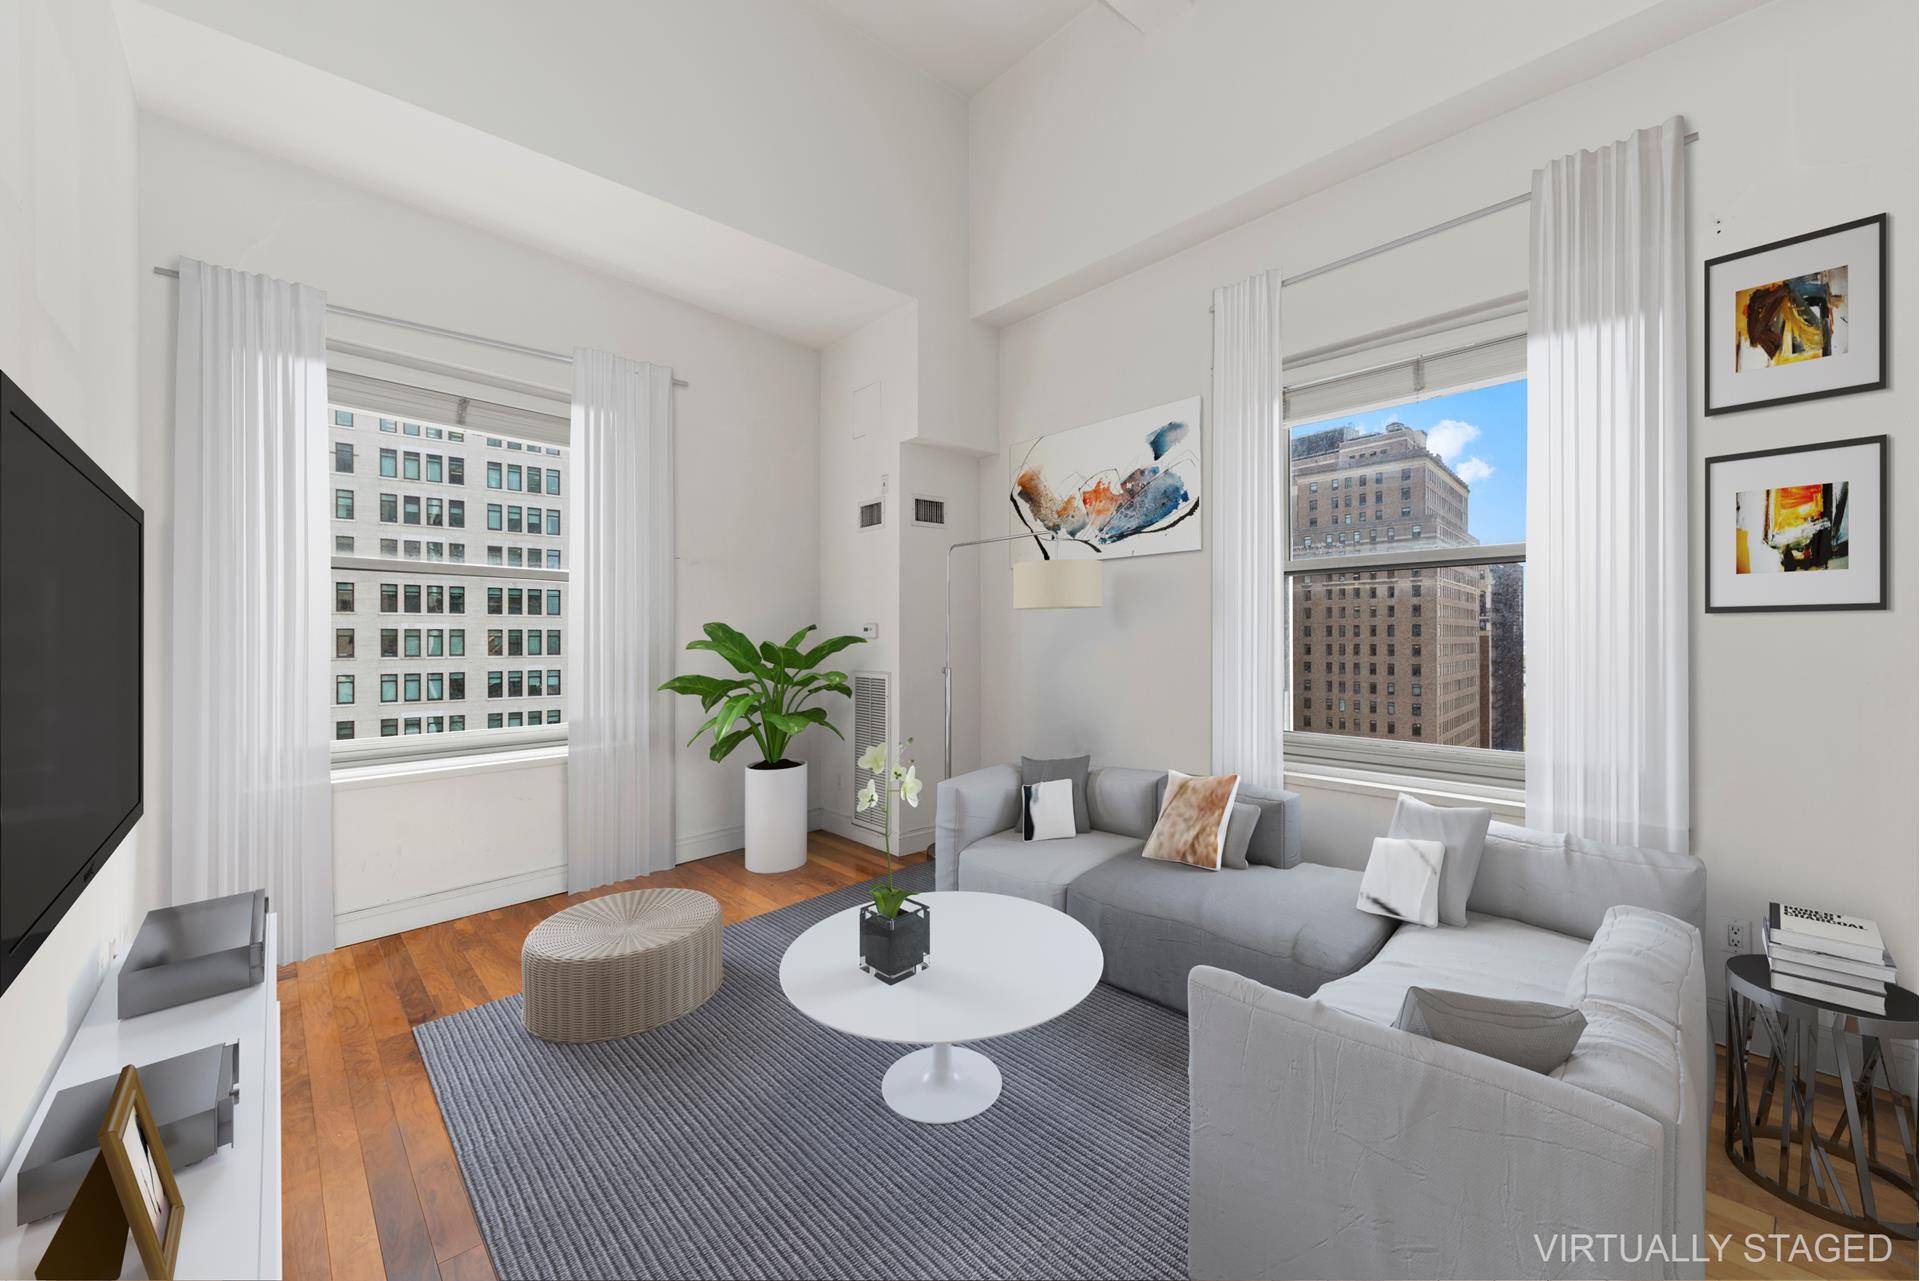 This corner one bedroom apartment with 16' ceilings throughout offers spectacular views of downtown New York and water views from oversized windows.